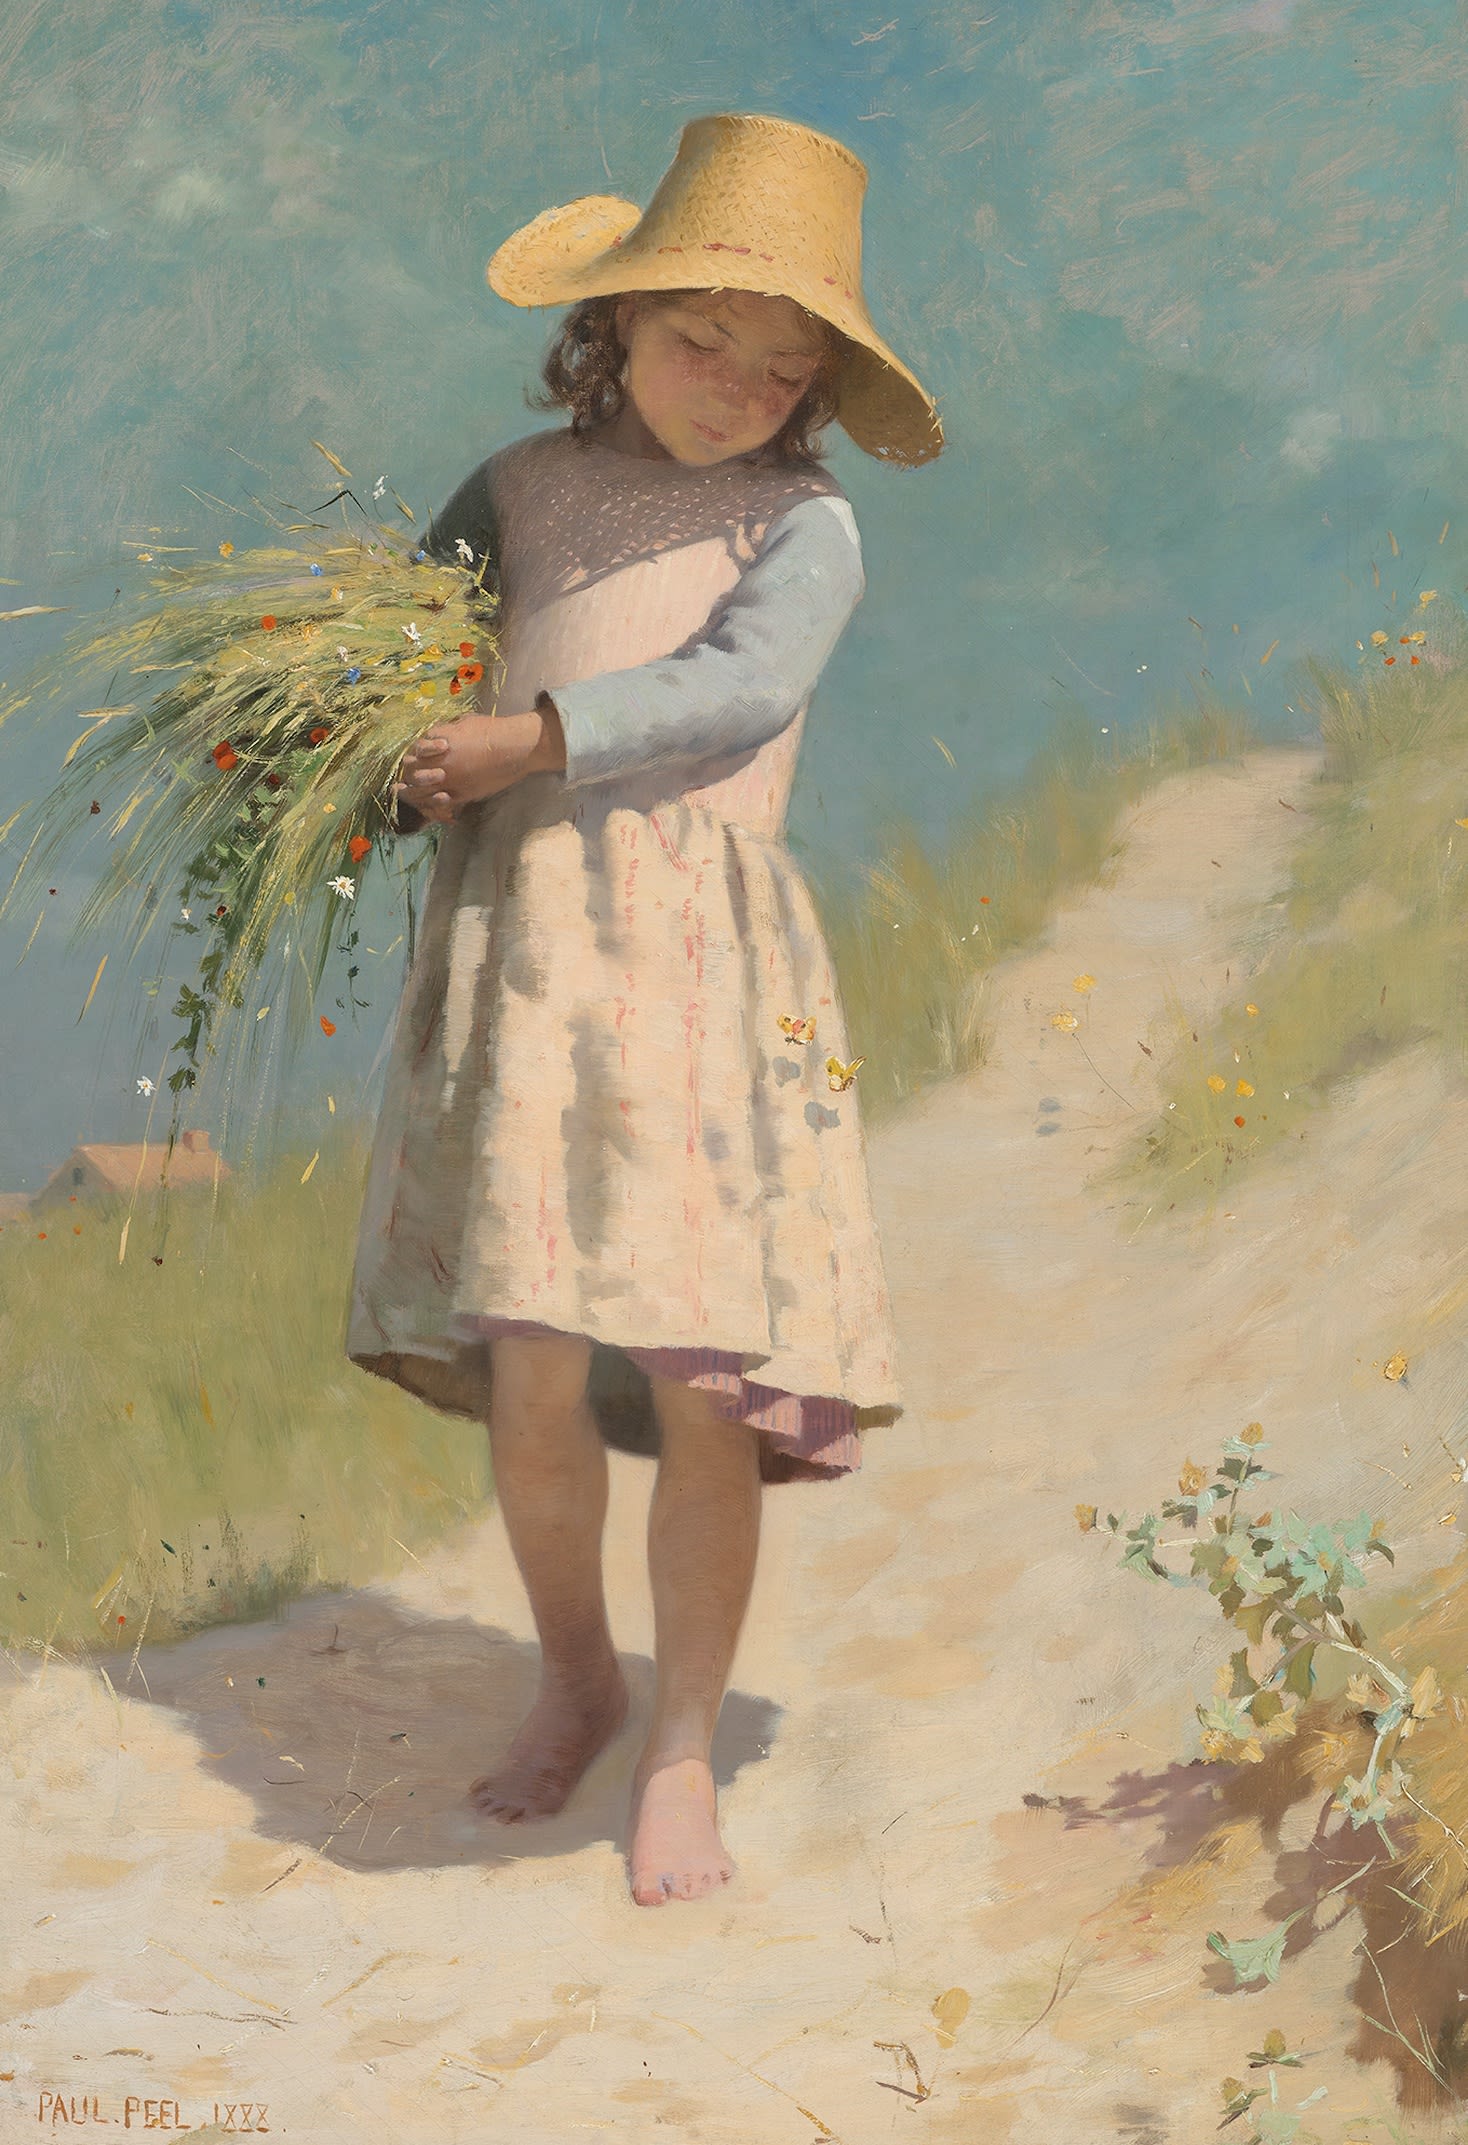 Paul Peel; The Young Gleaner